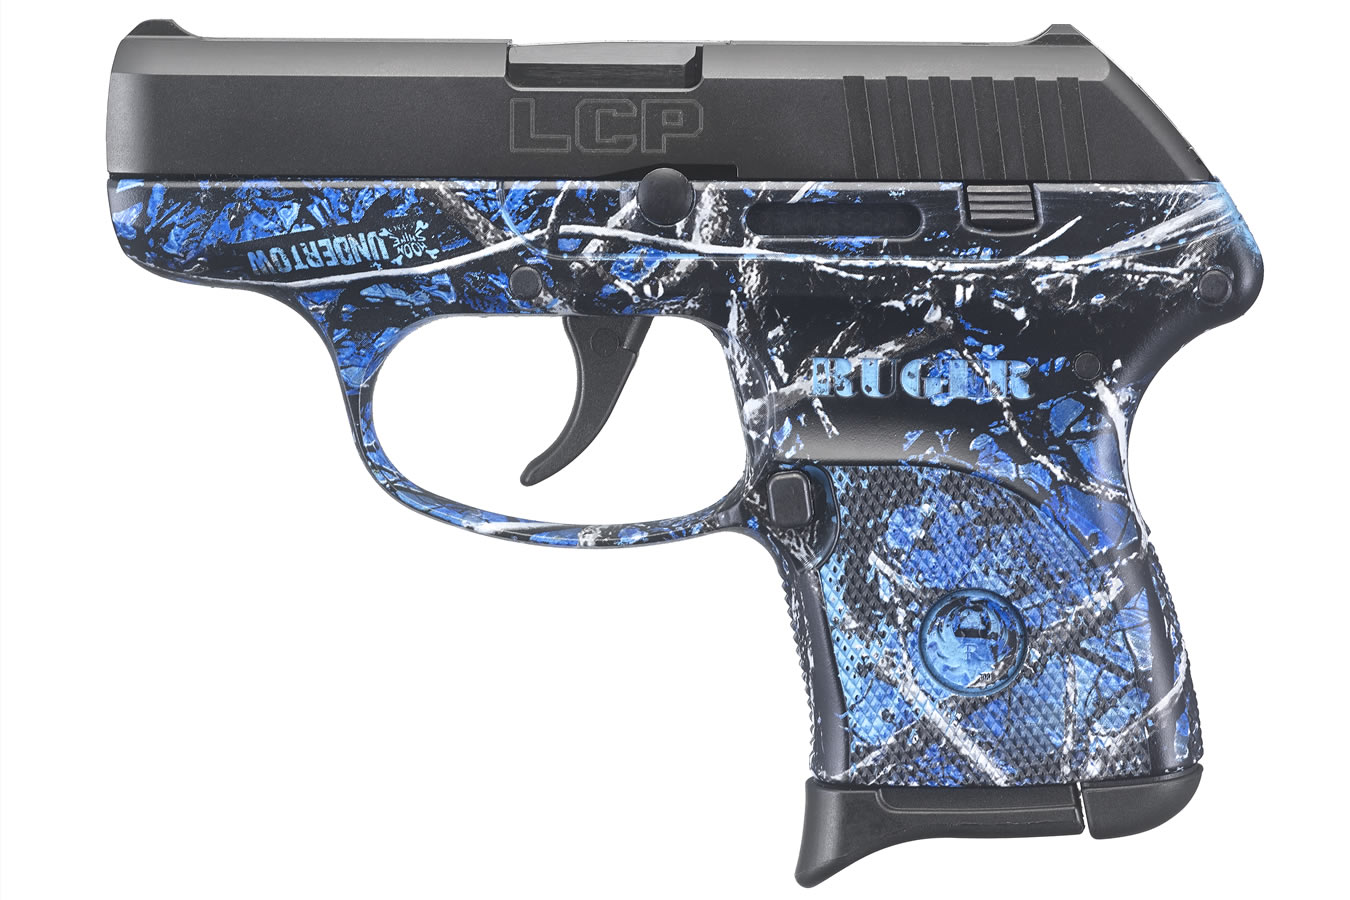 No. 16 Best Selling: RUGER LCP 380 ACPBLACK/ MOONSHINE CAMO UNDERTOW